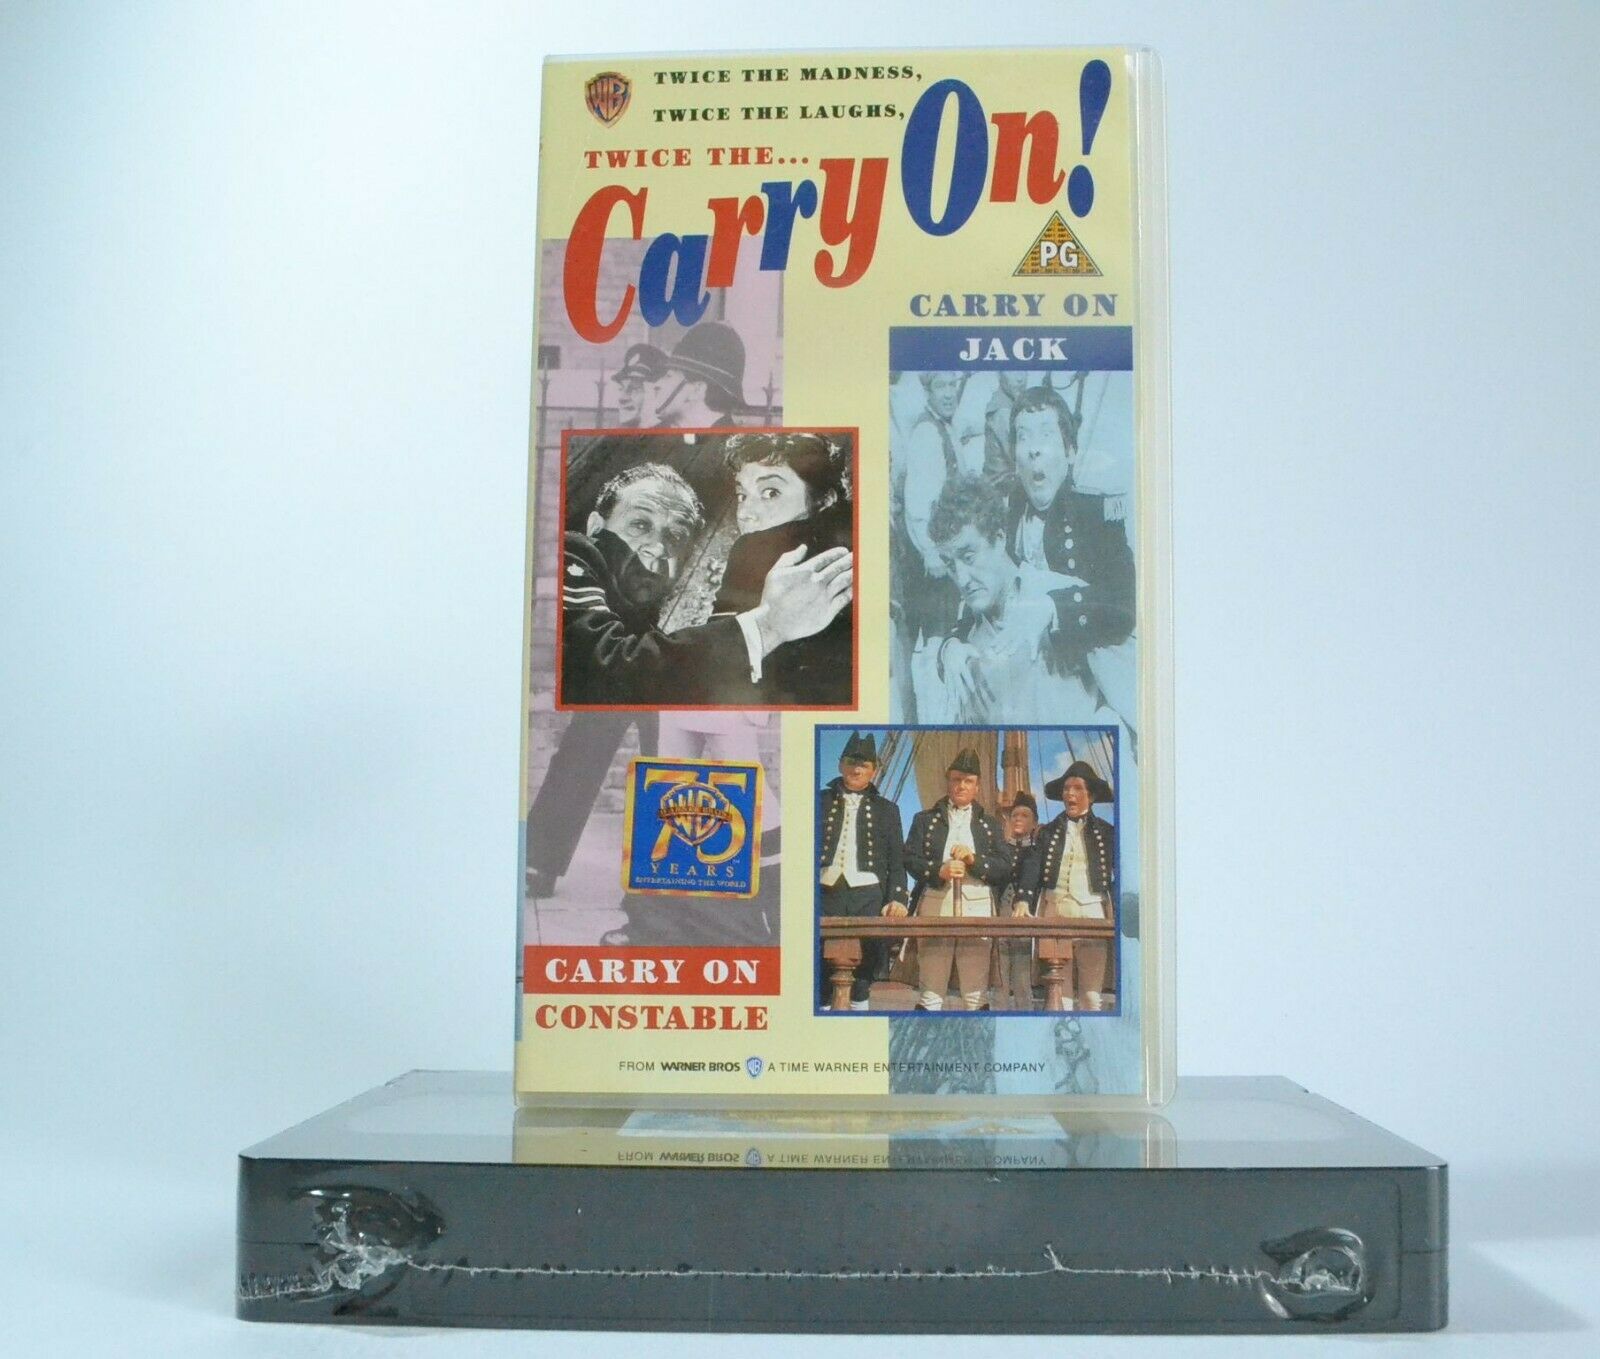 2x Carry On: Constable / Jack [Brand New Sealed]: Comedy - Sidney James - VHS-